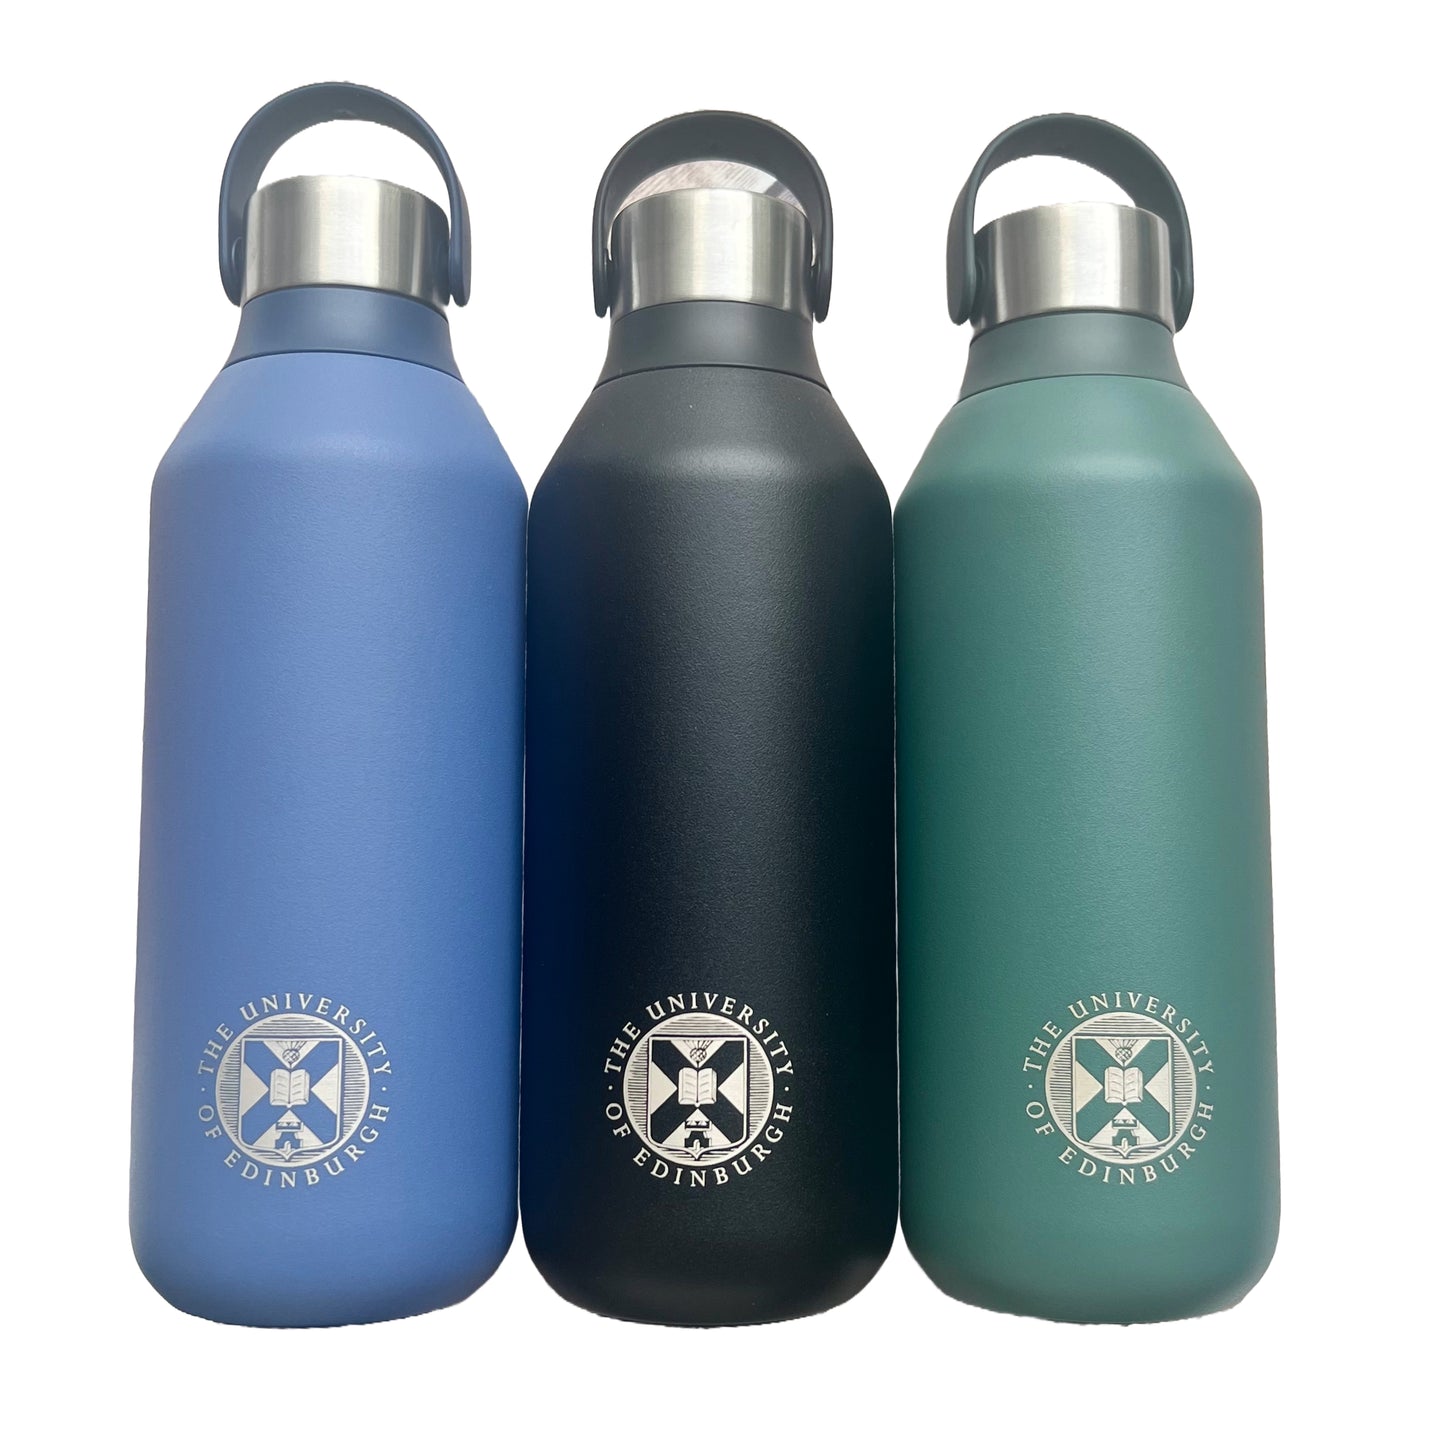 Blue, black and green chillys bottles with the university crest engraved